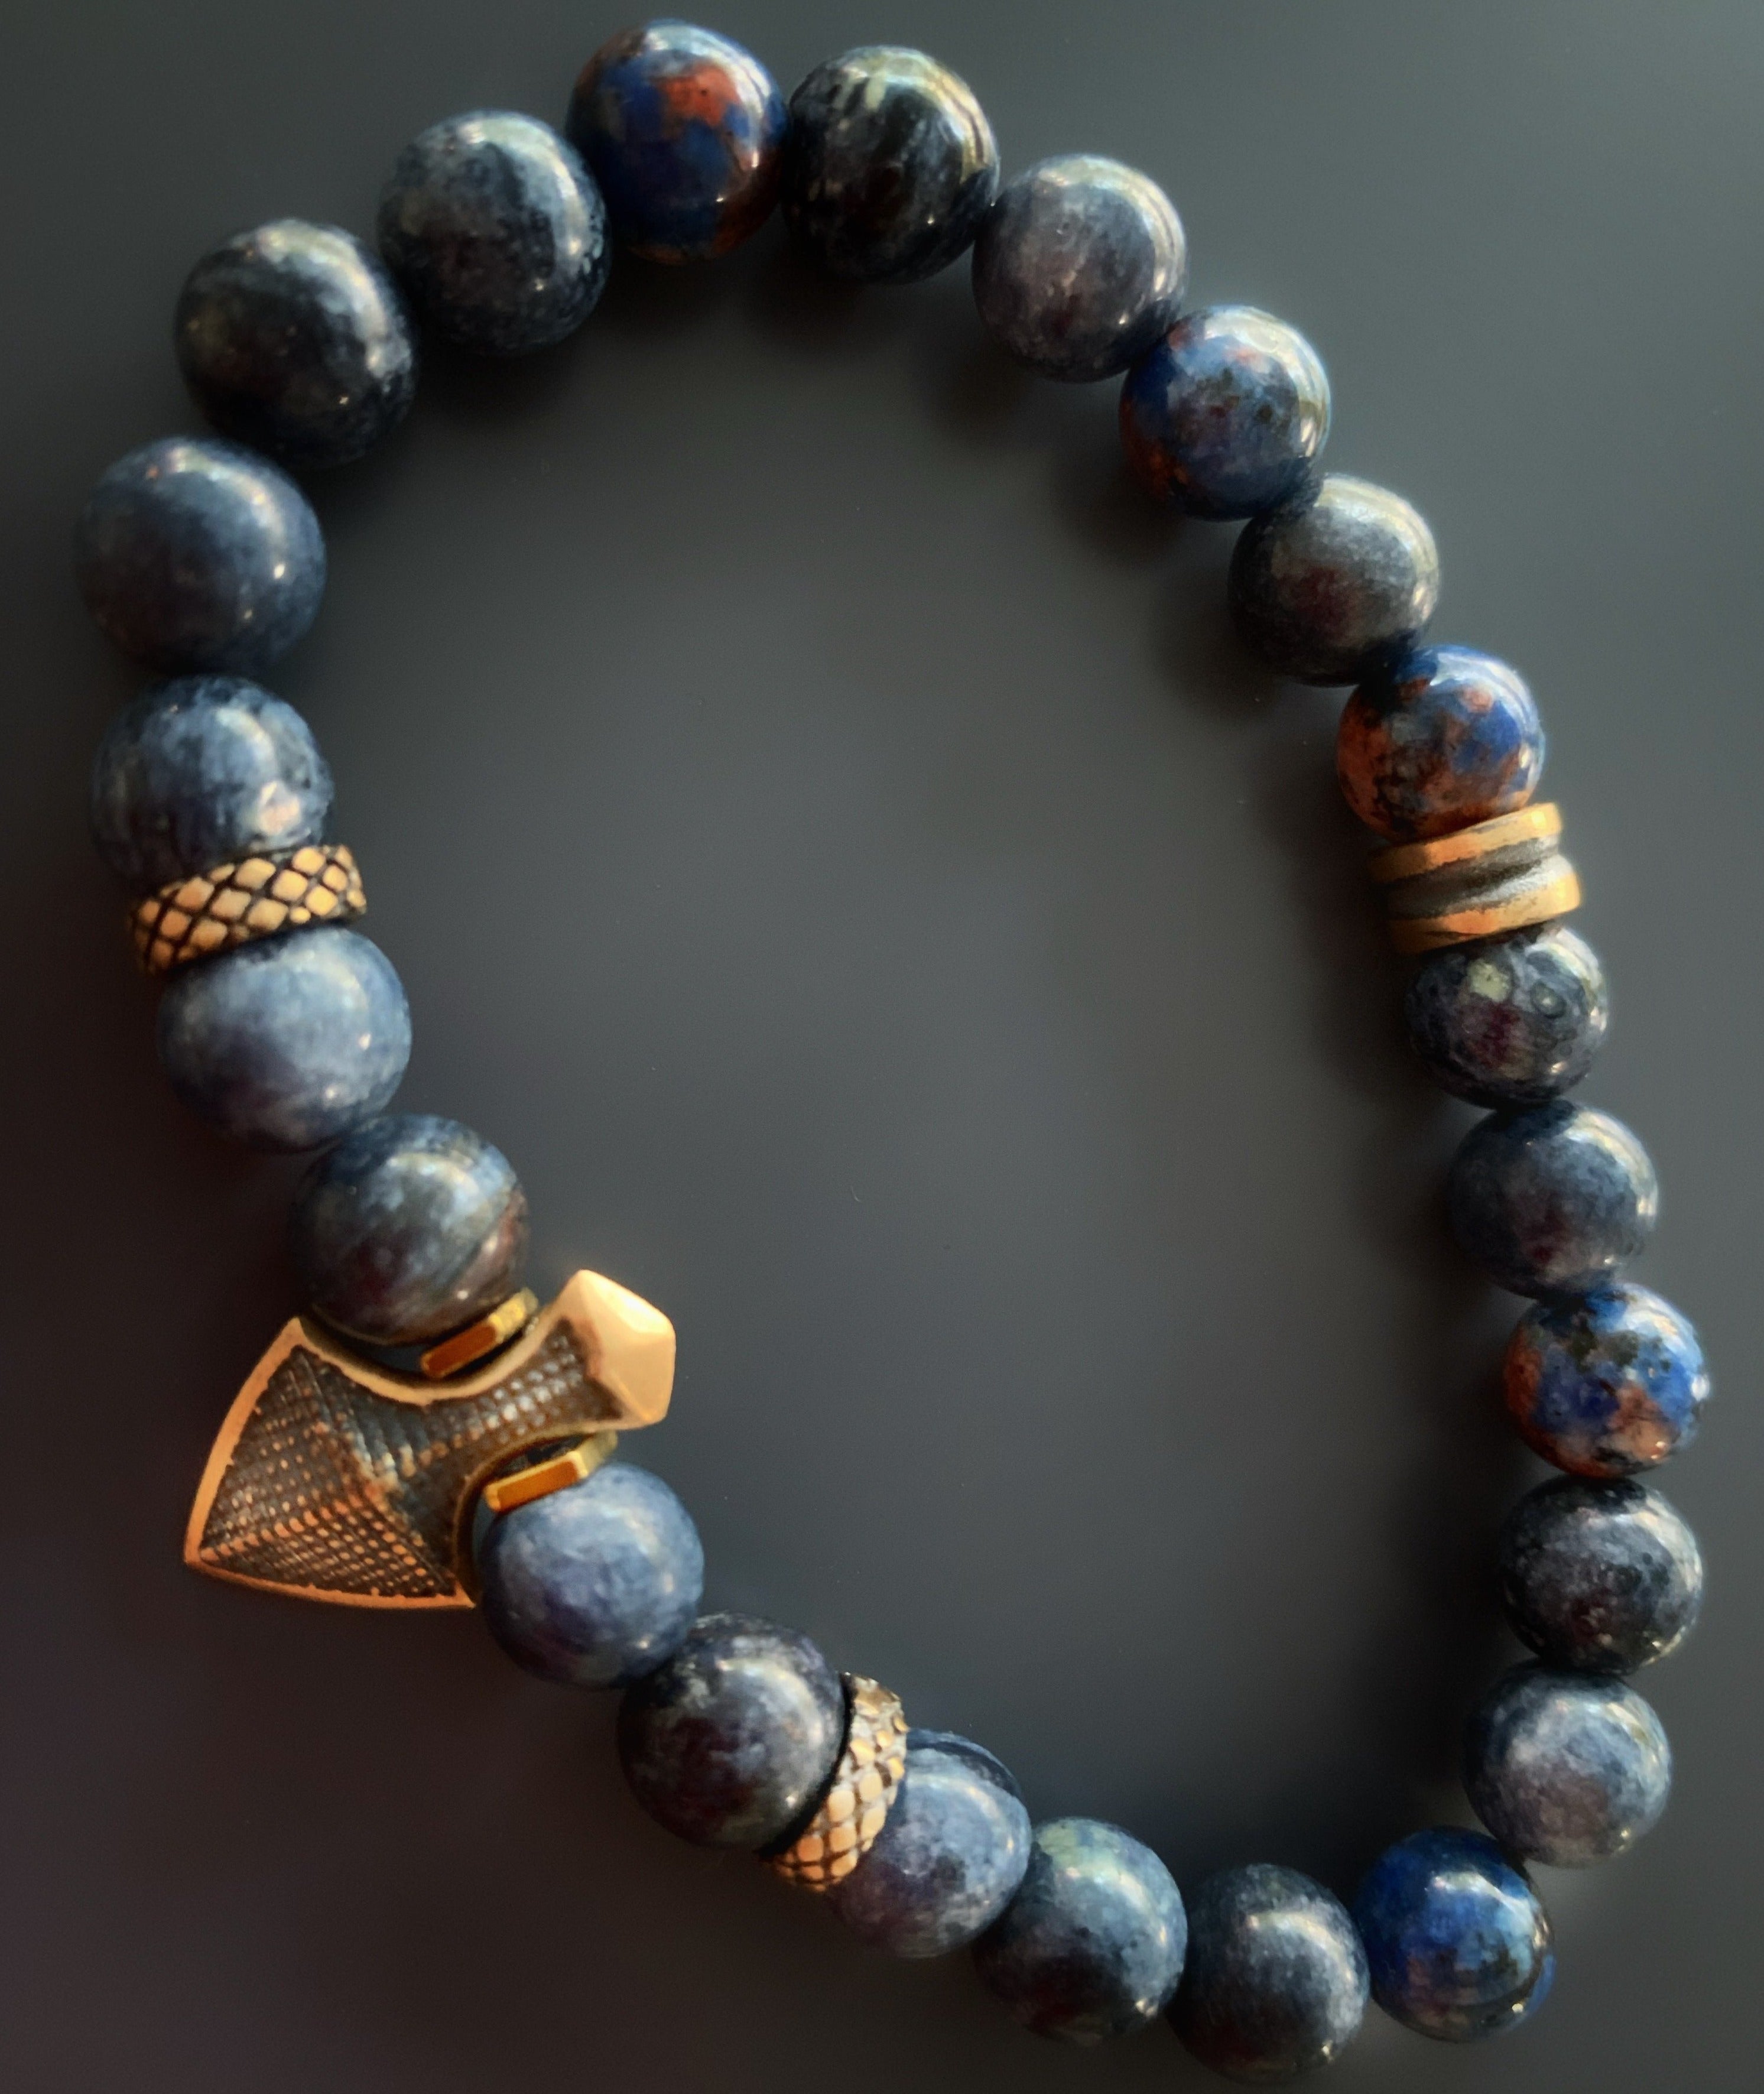 Sodalite Stone Bracelet for Verbalizing Thoughts and Feelings